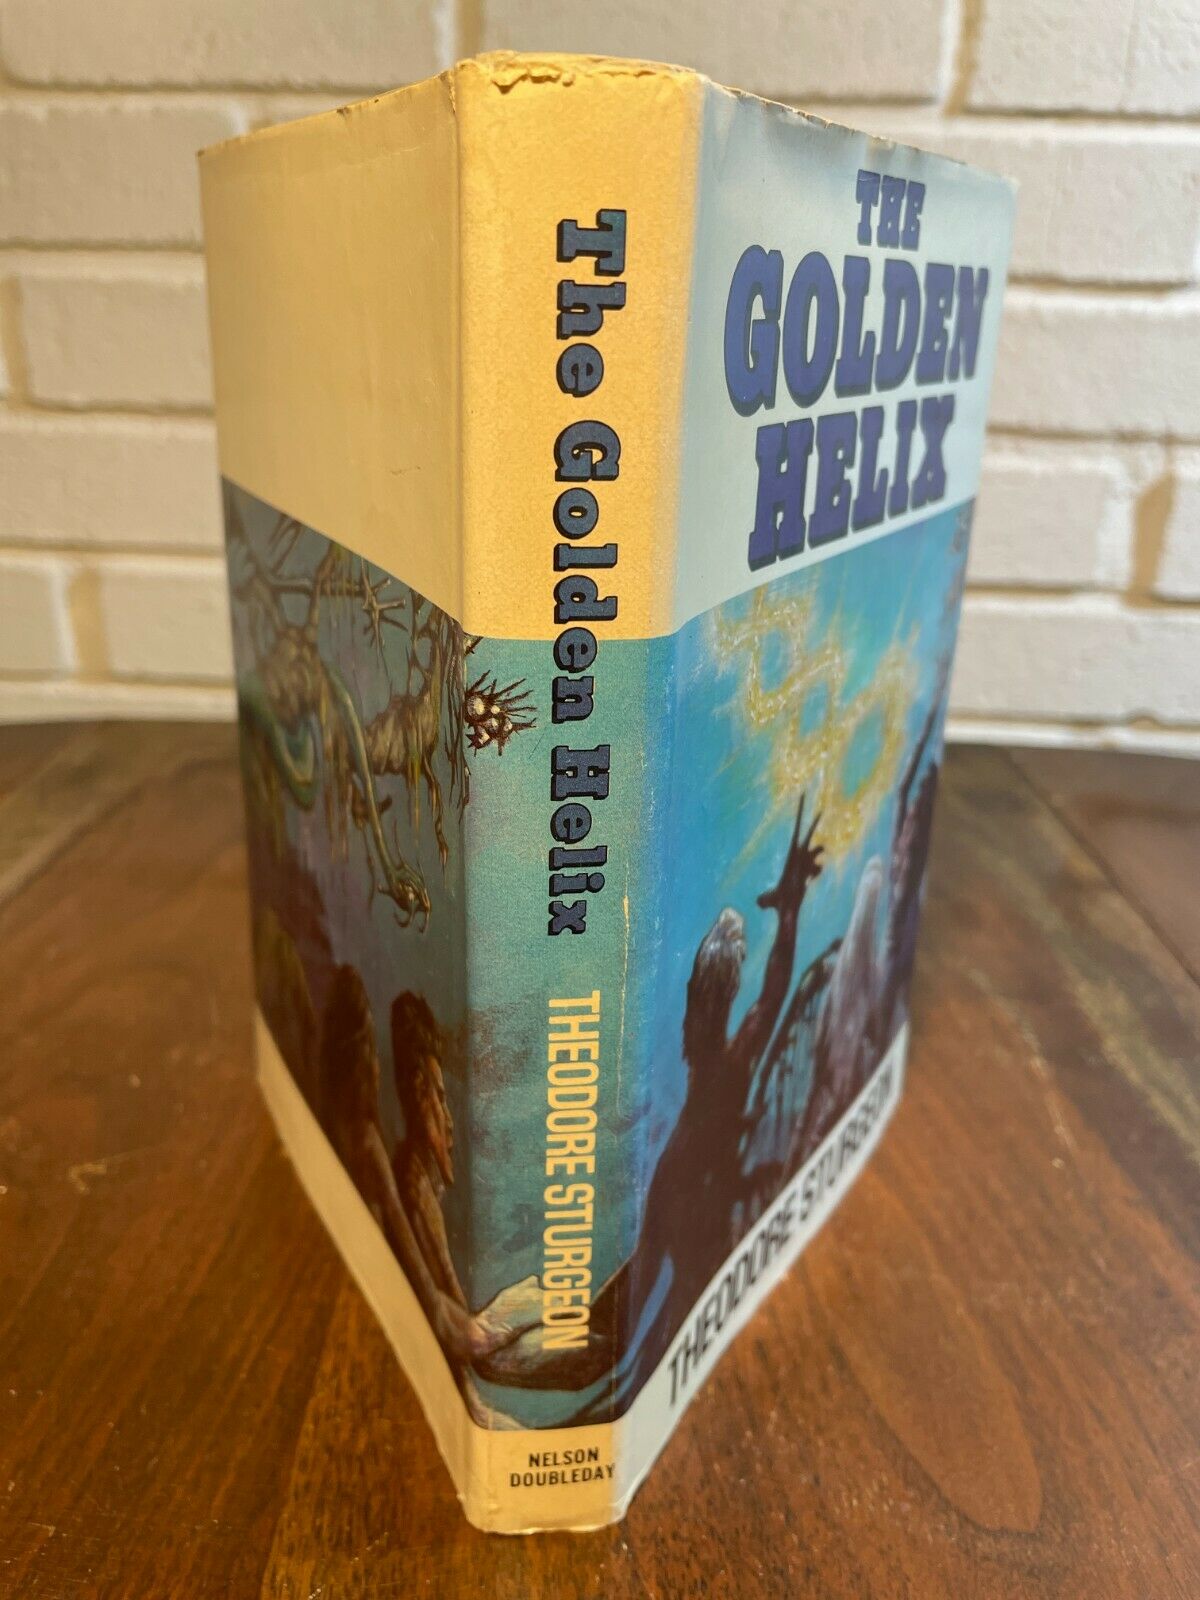 THE GOLDEN HELIX by Theodore Sturgeon, 1979